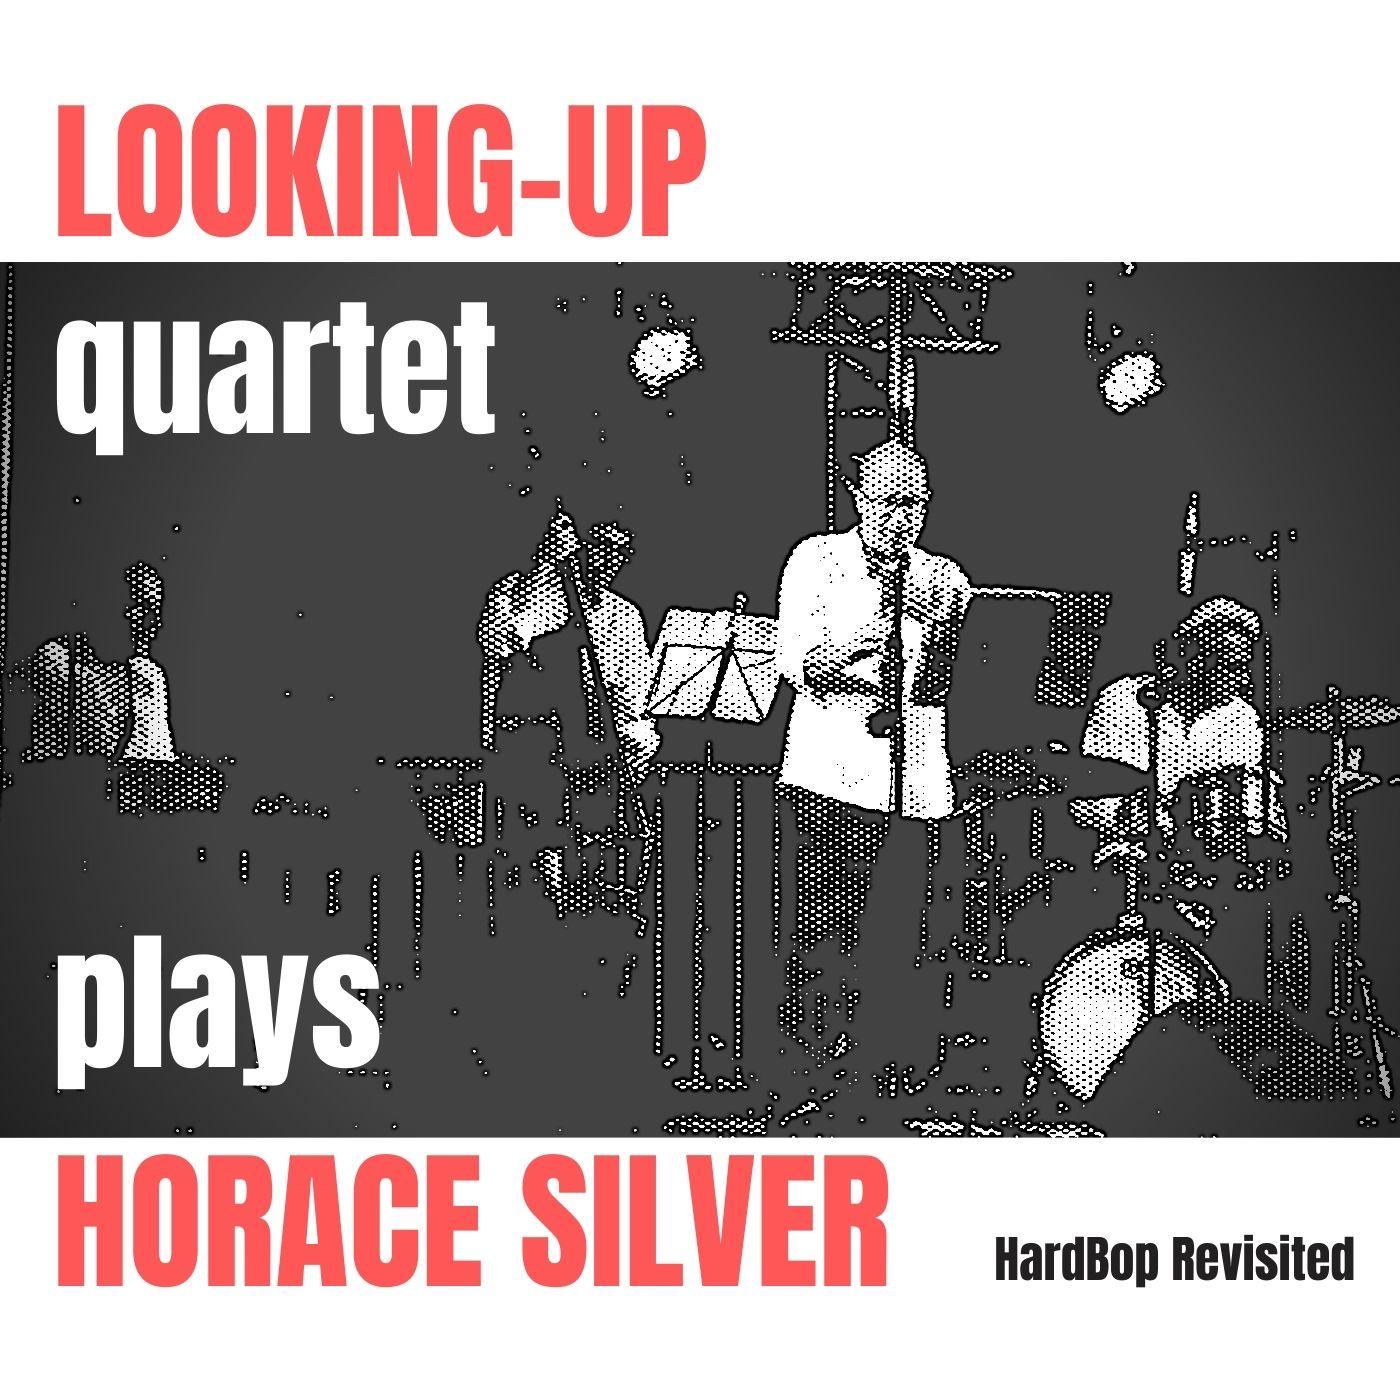 Copy of looking up quartet plays horace silver music 1